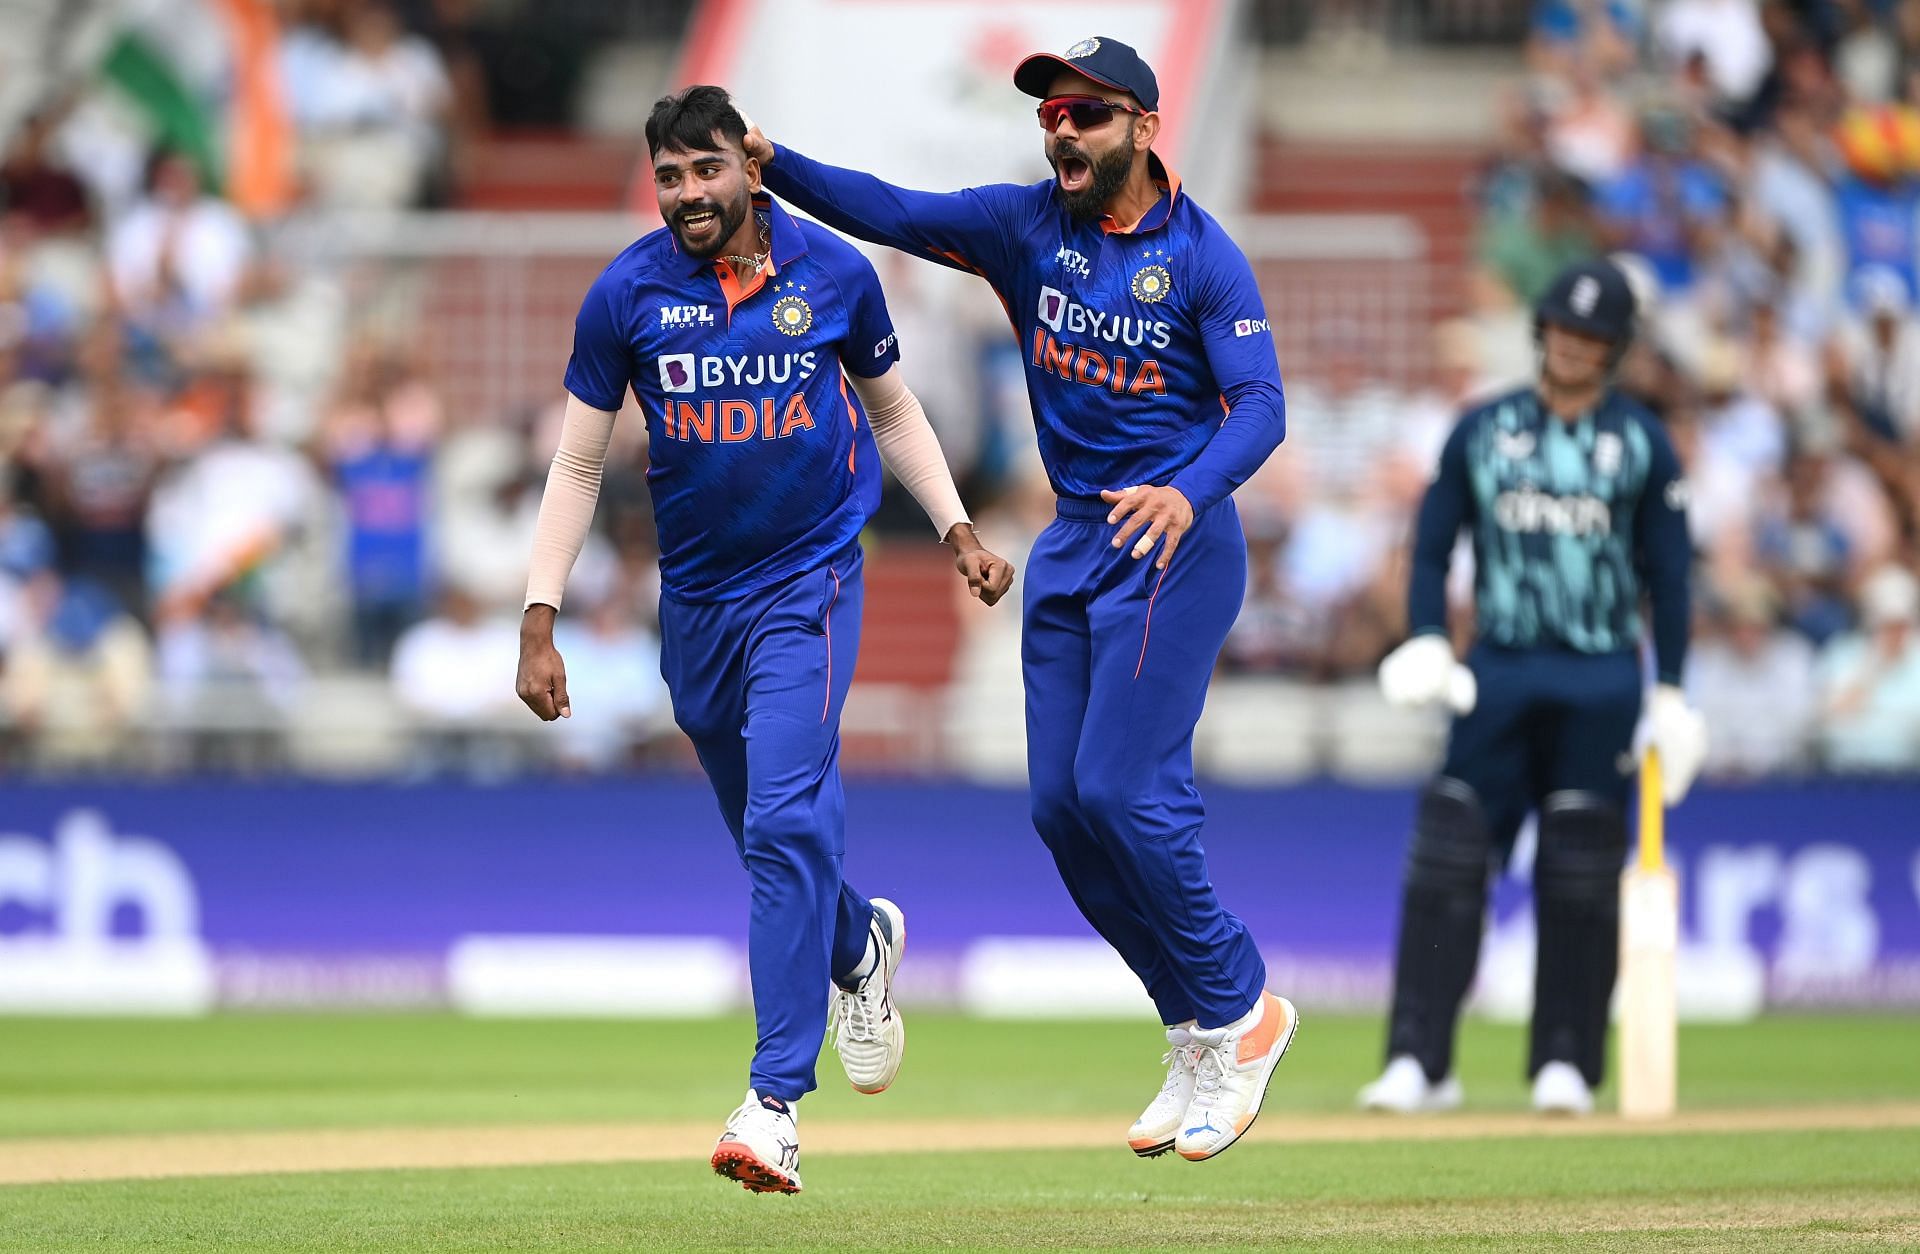 India vs England, 2023 World Cup warm-up match telecast channel Where to watch and live streaming details in India